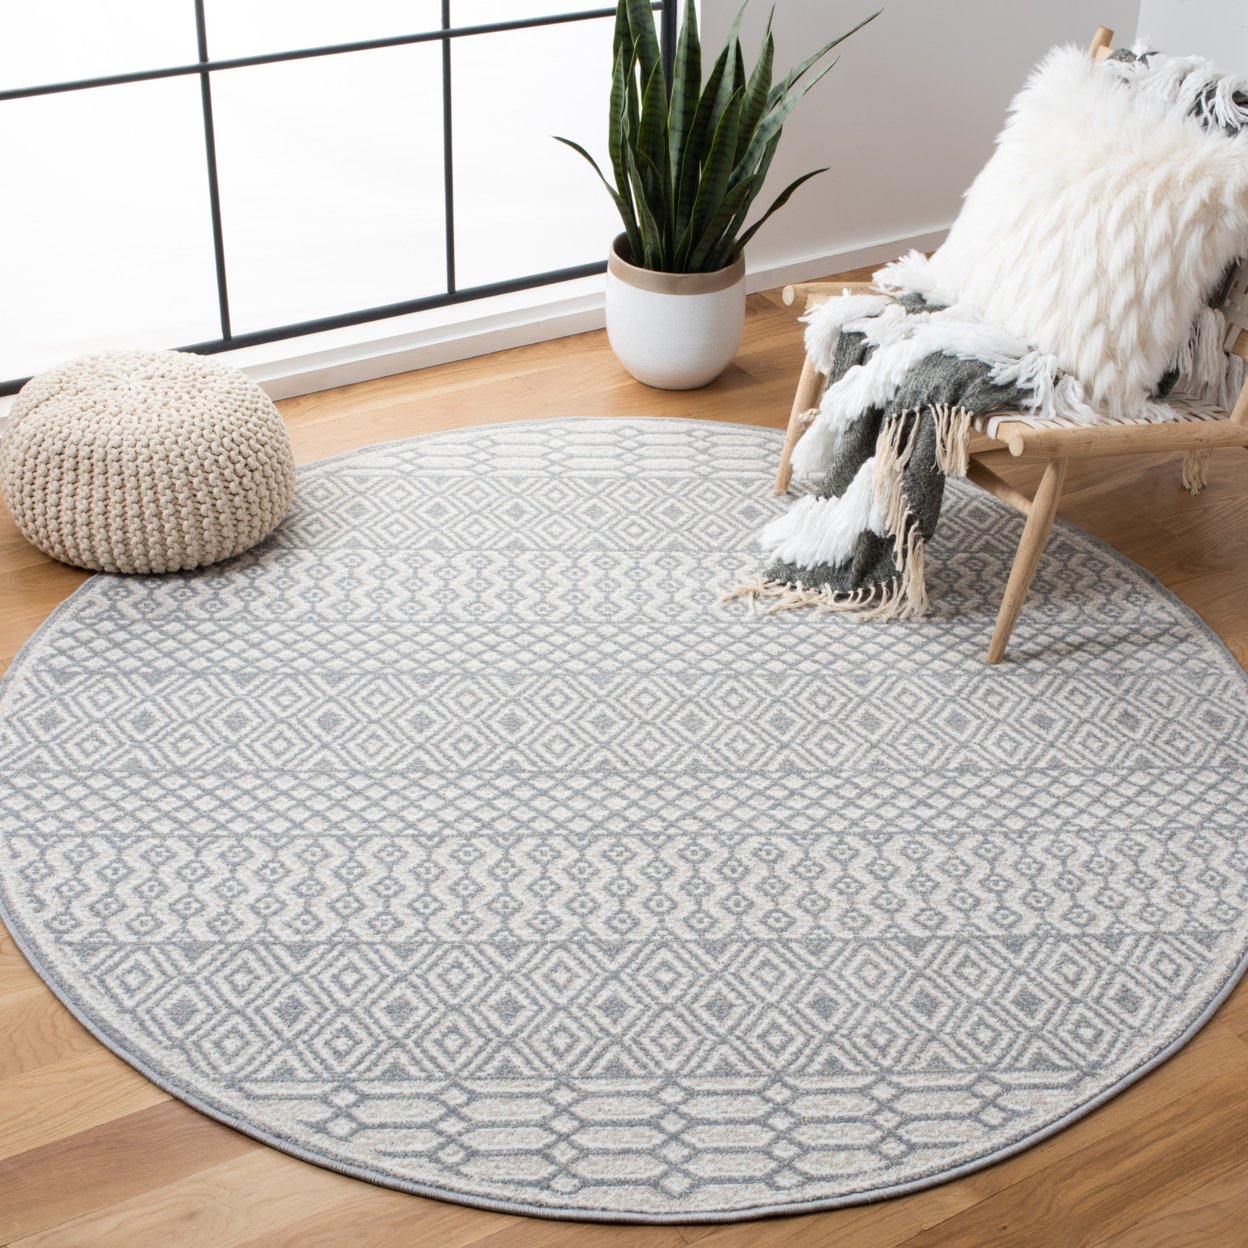 SAFAVIEH Belmont Collection BMT132A Ivory / Grey Rug - 6-7 X 6-7 Square